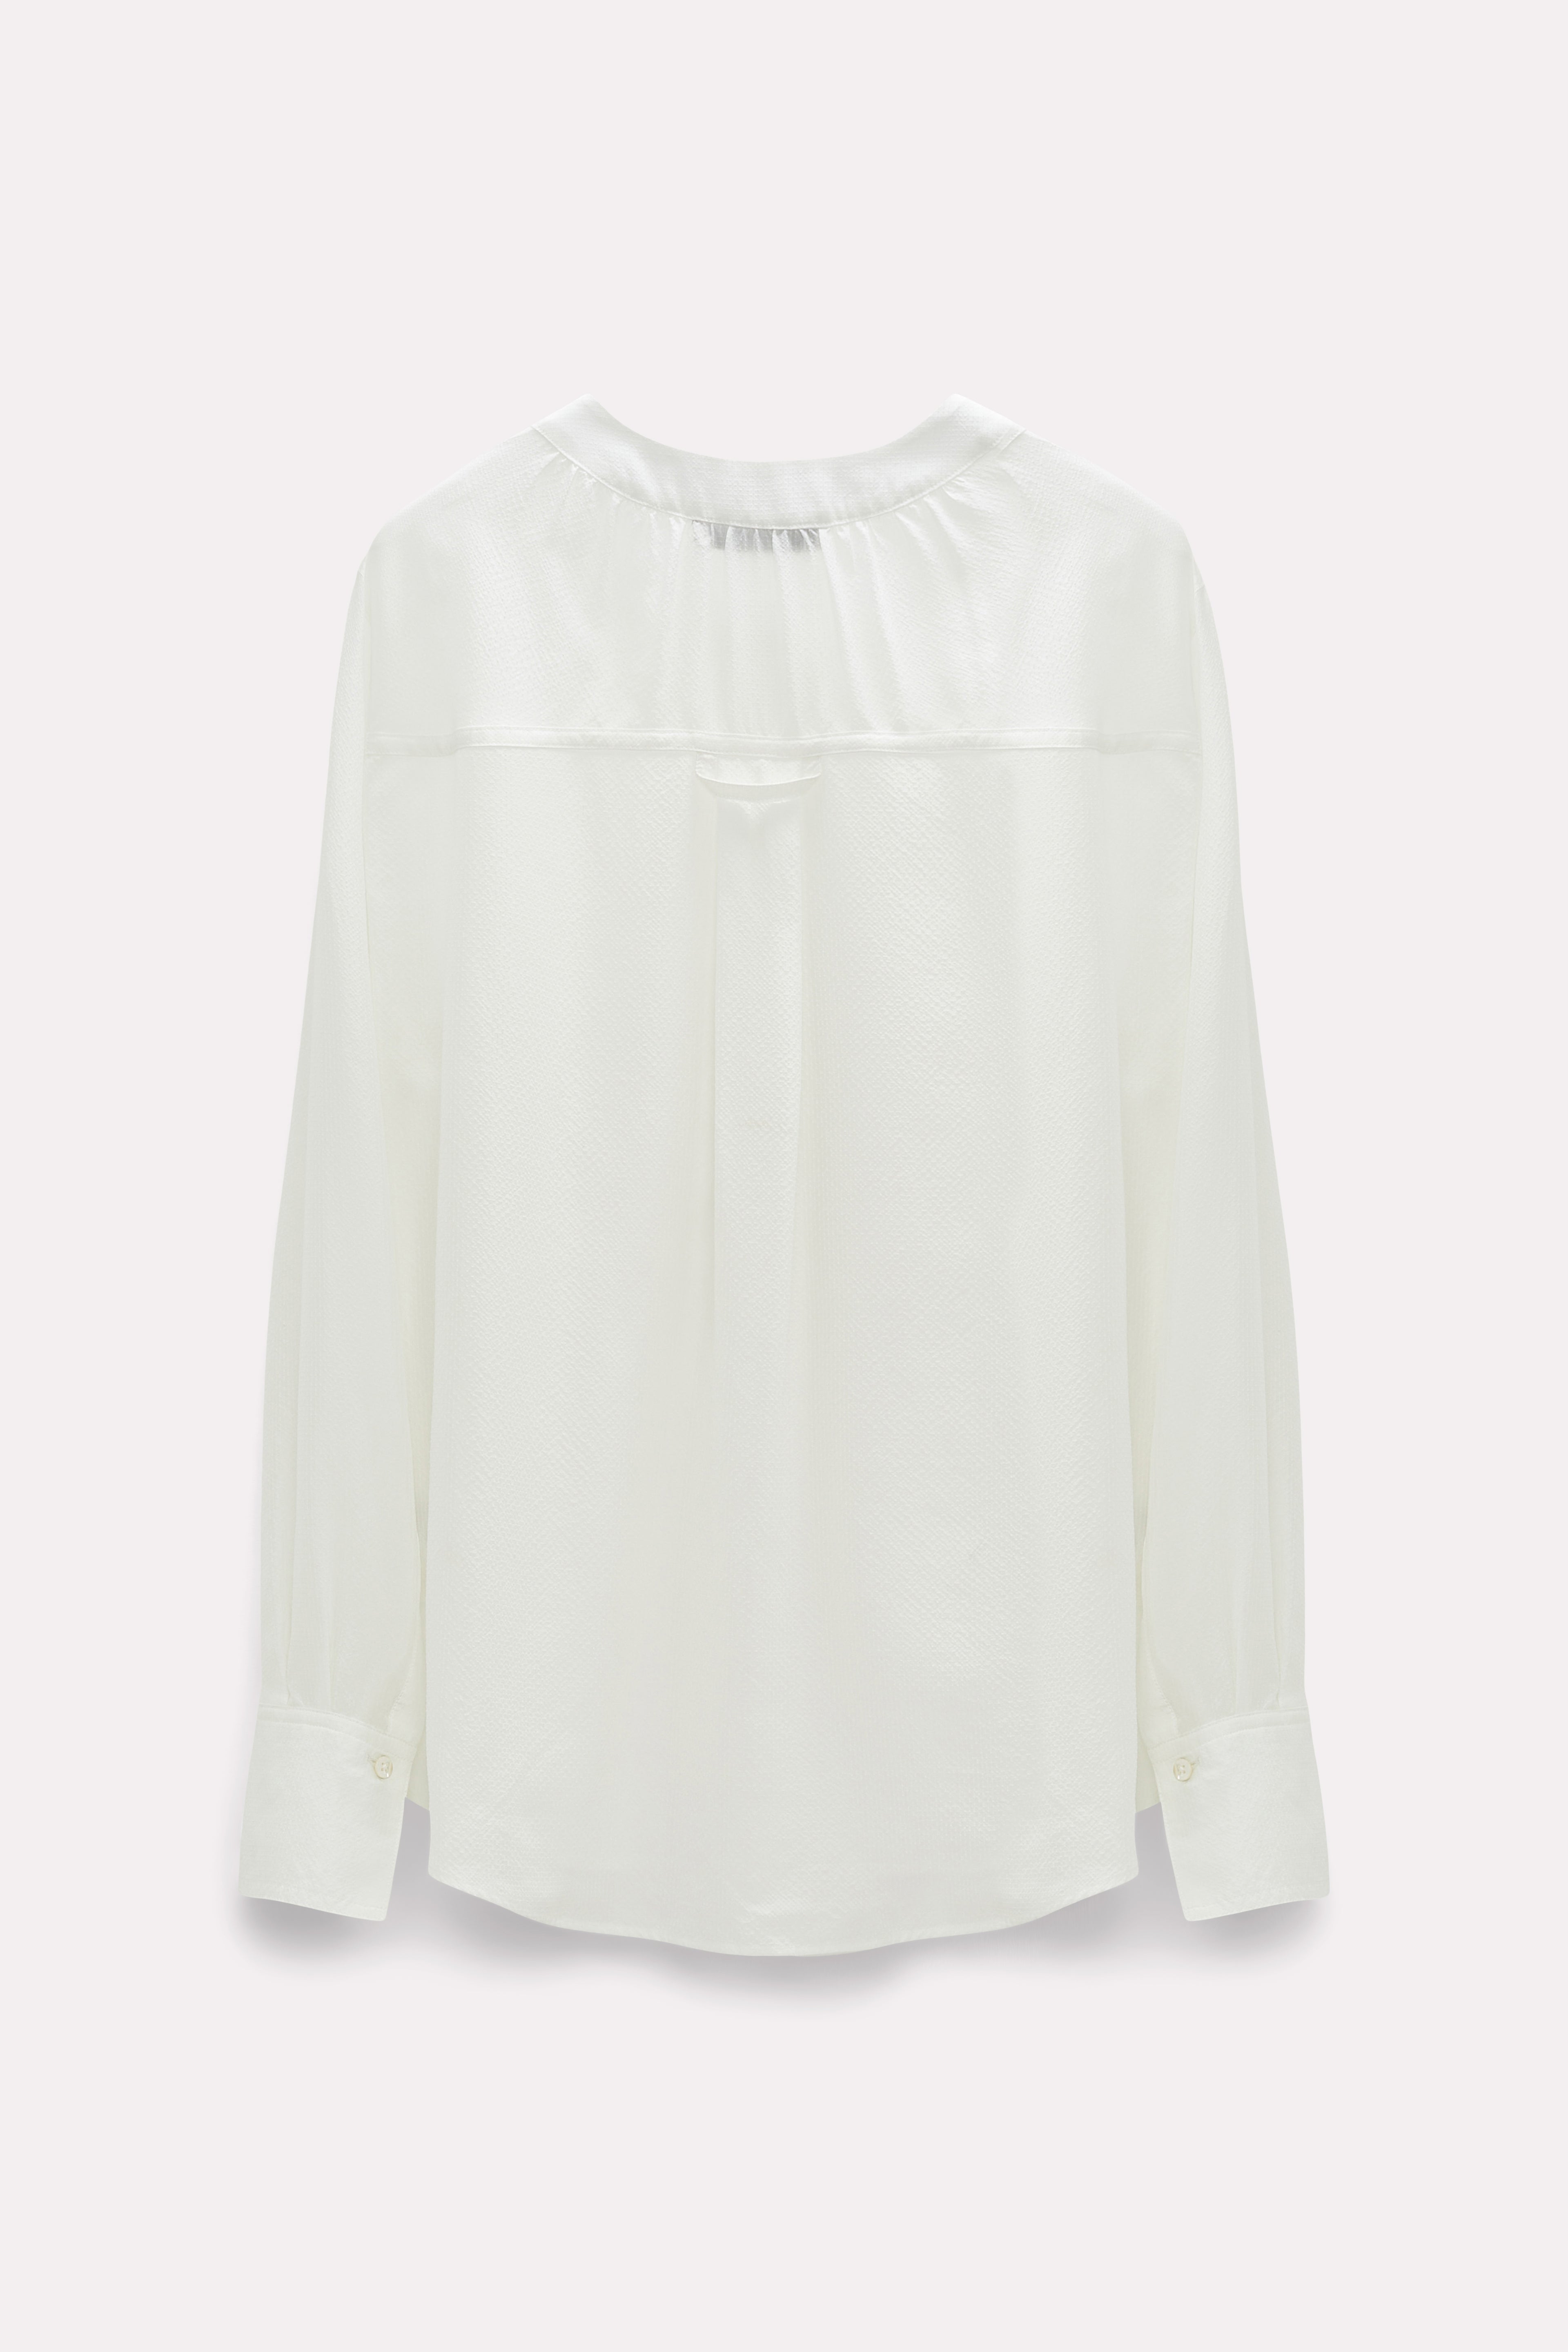 Dorothee-Schumacher-OUTLET-SALE-SILKY-EASE-blouse-Blusen-ARCHIVE-COLLECTION-2.jpg